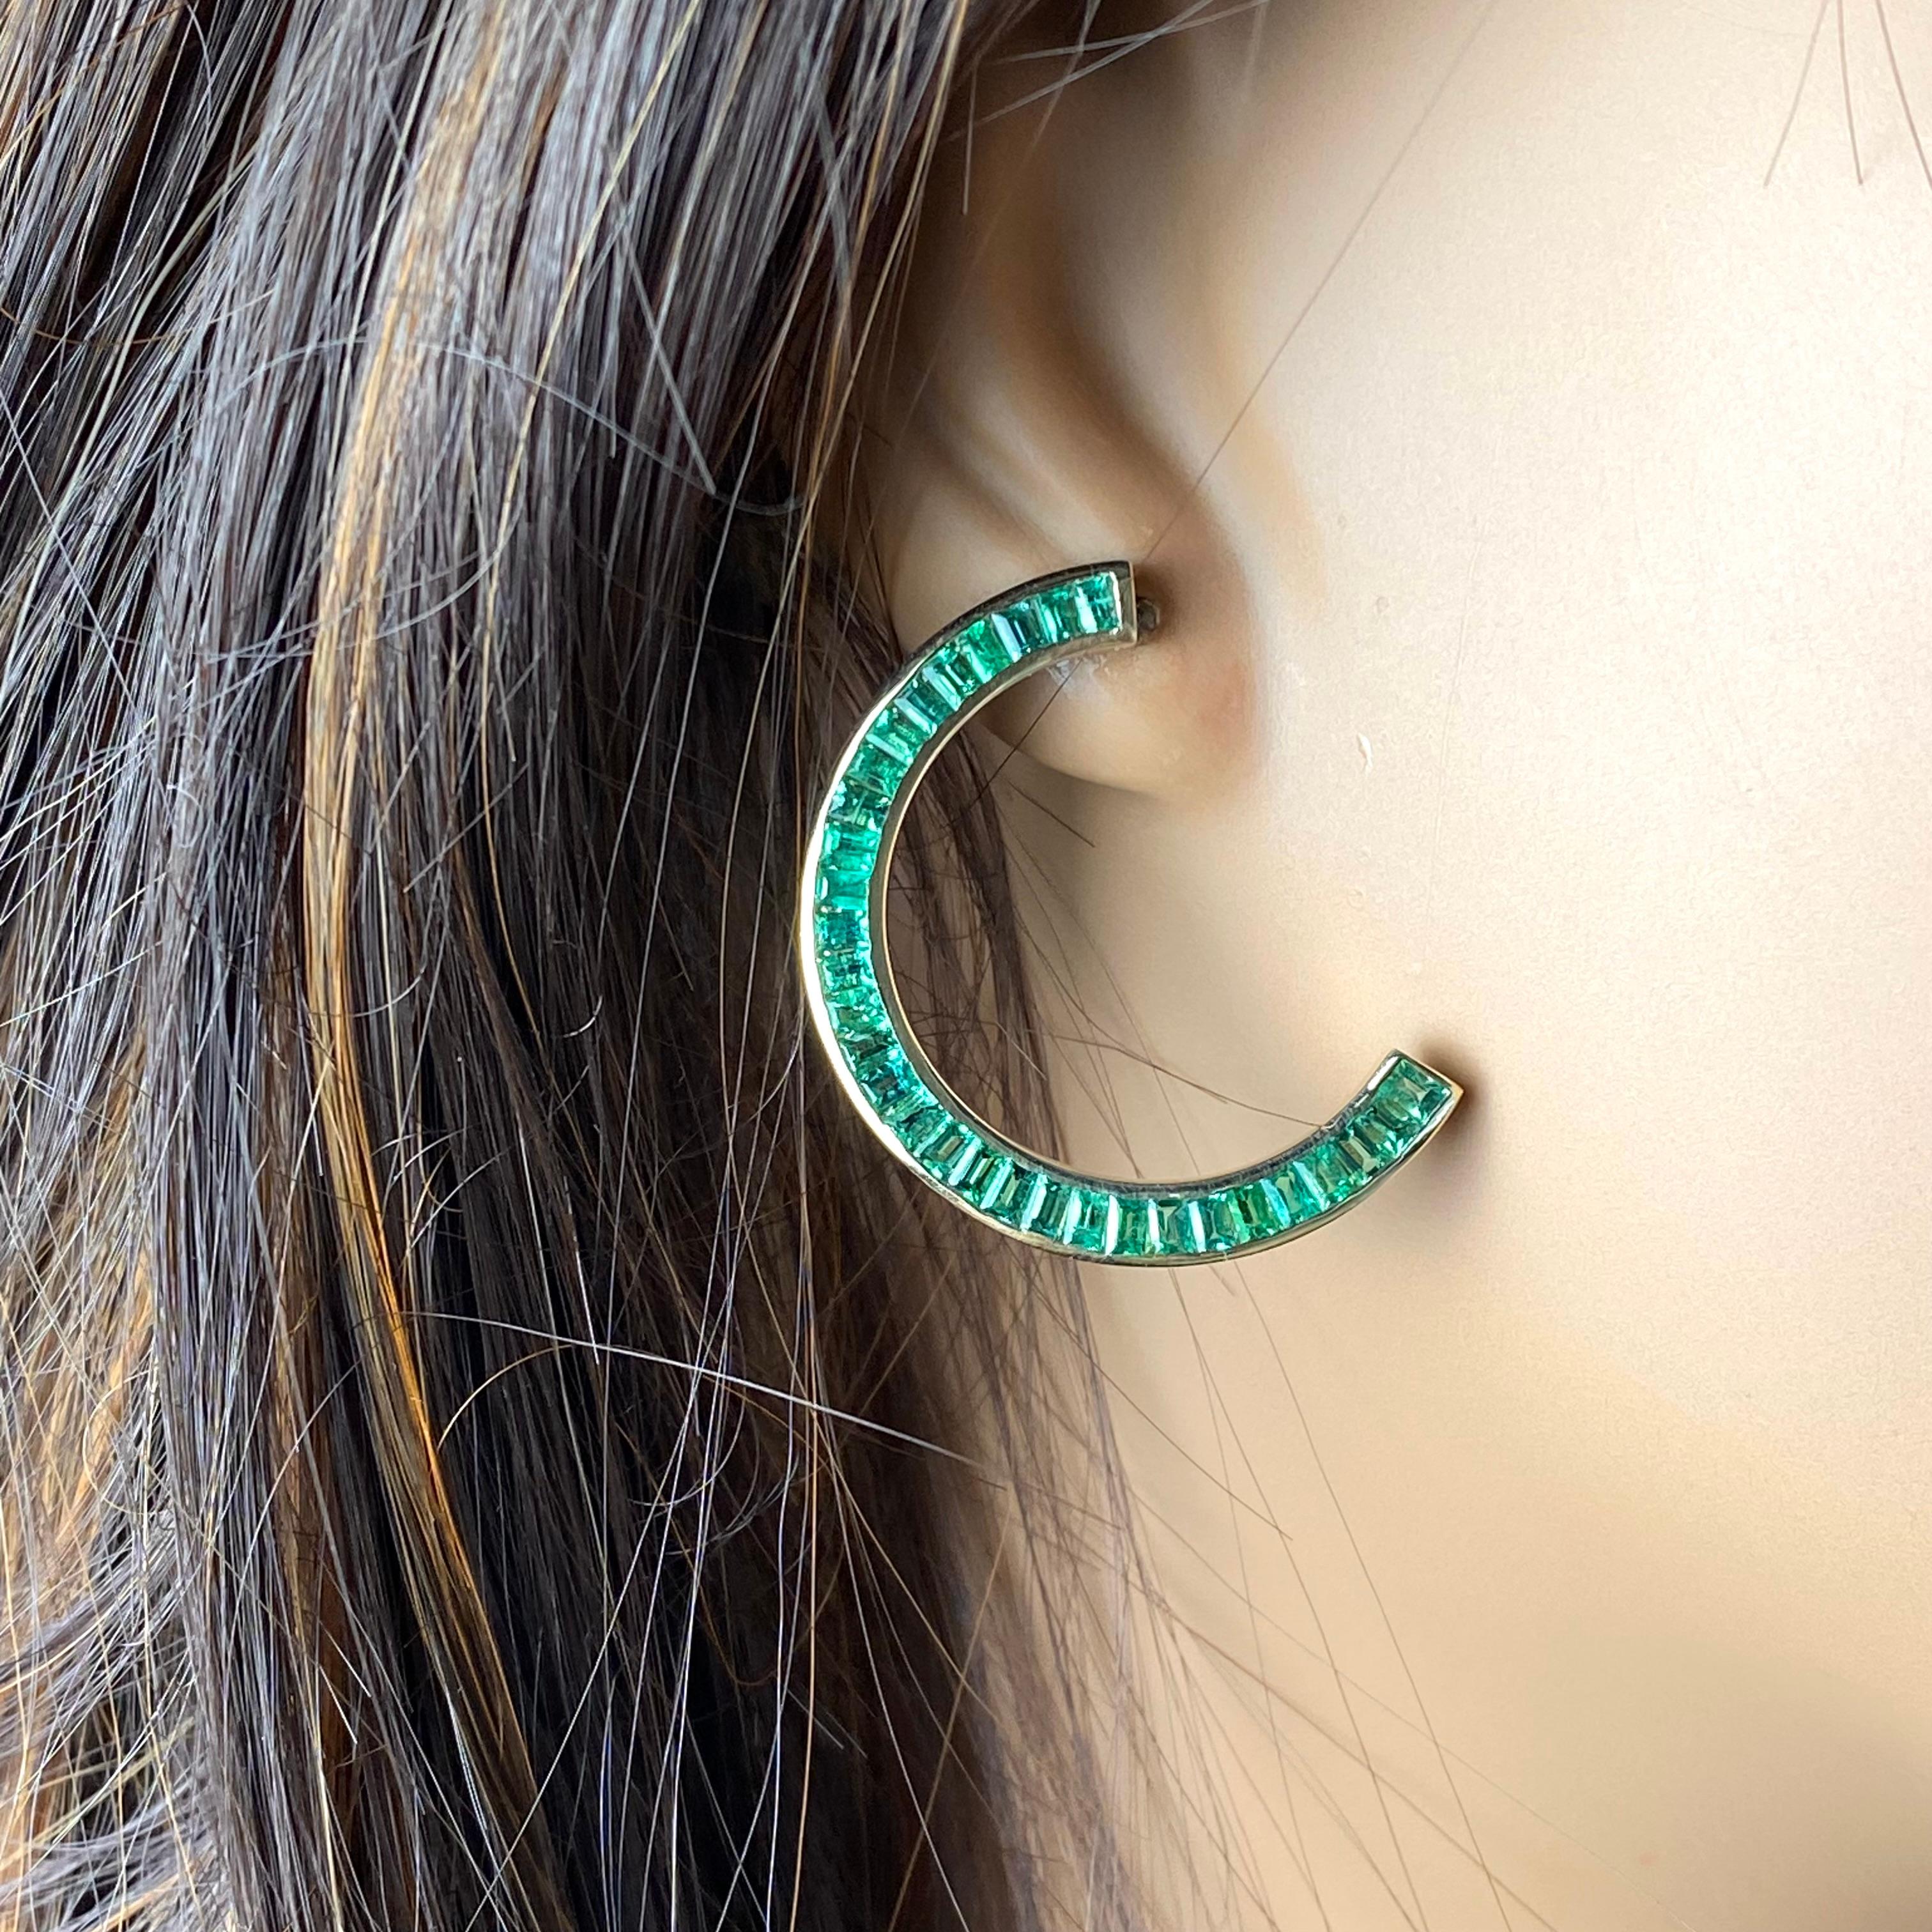 Introducing our exquisite 14 karat yellow gold front facing half moon earrings, meticulously crafted to captivate with elegance and sophistication. These stunning earrings boast a total of 62 perfectly matched baguette emeralds, each meticulously